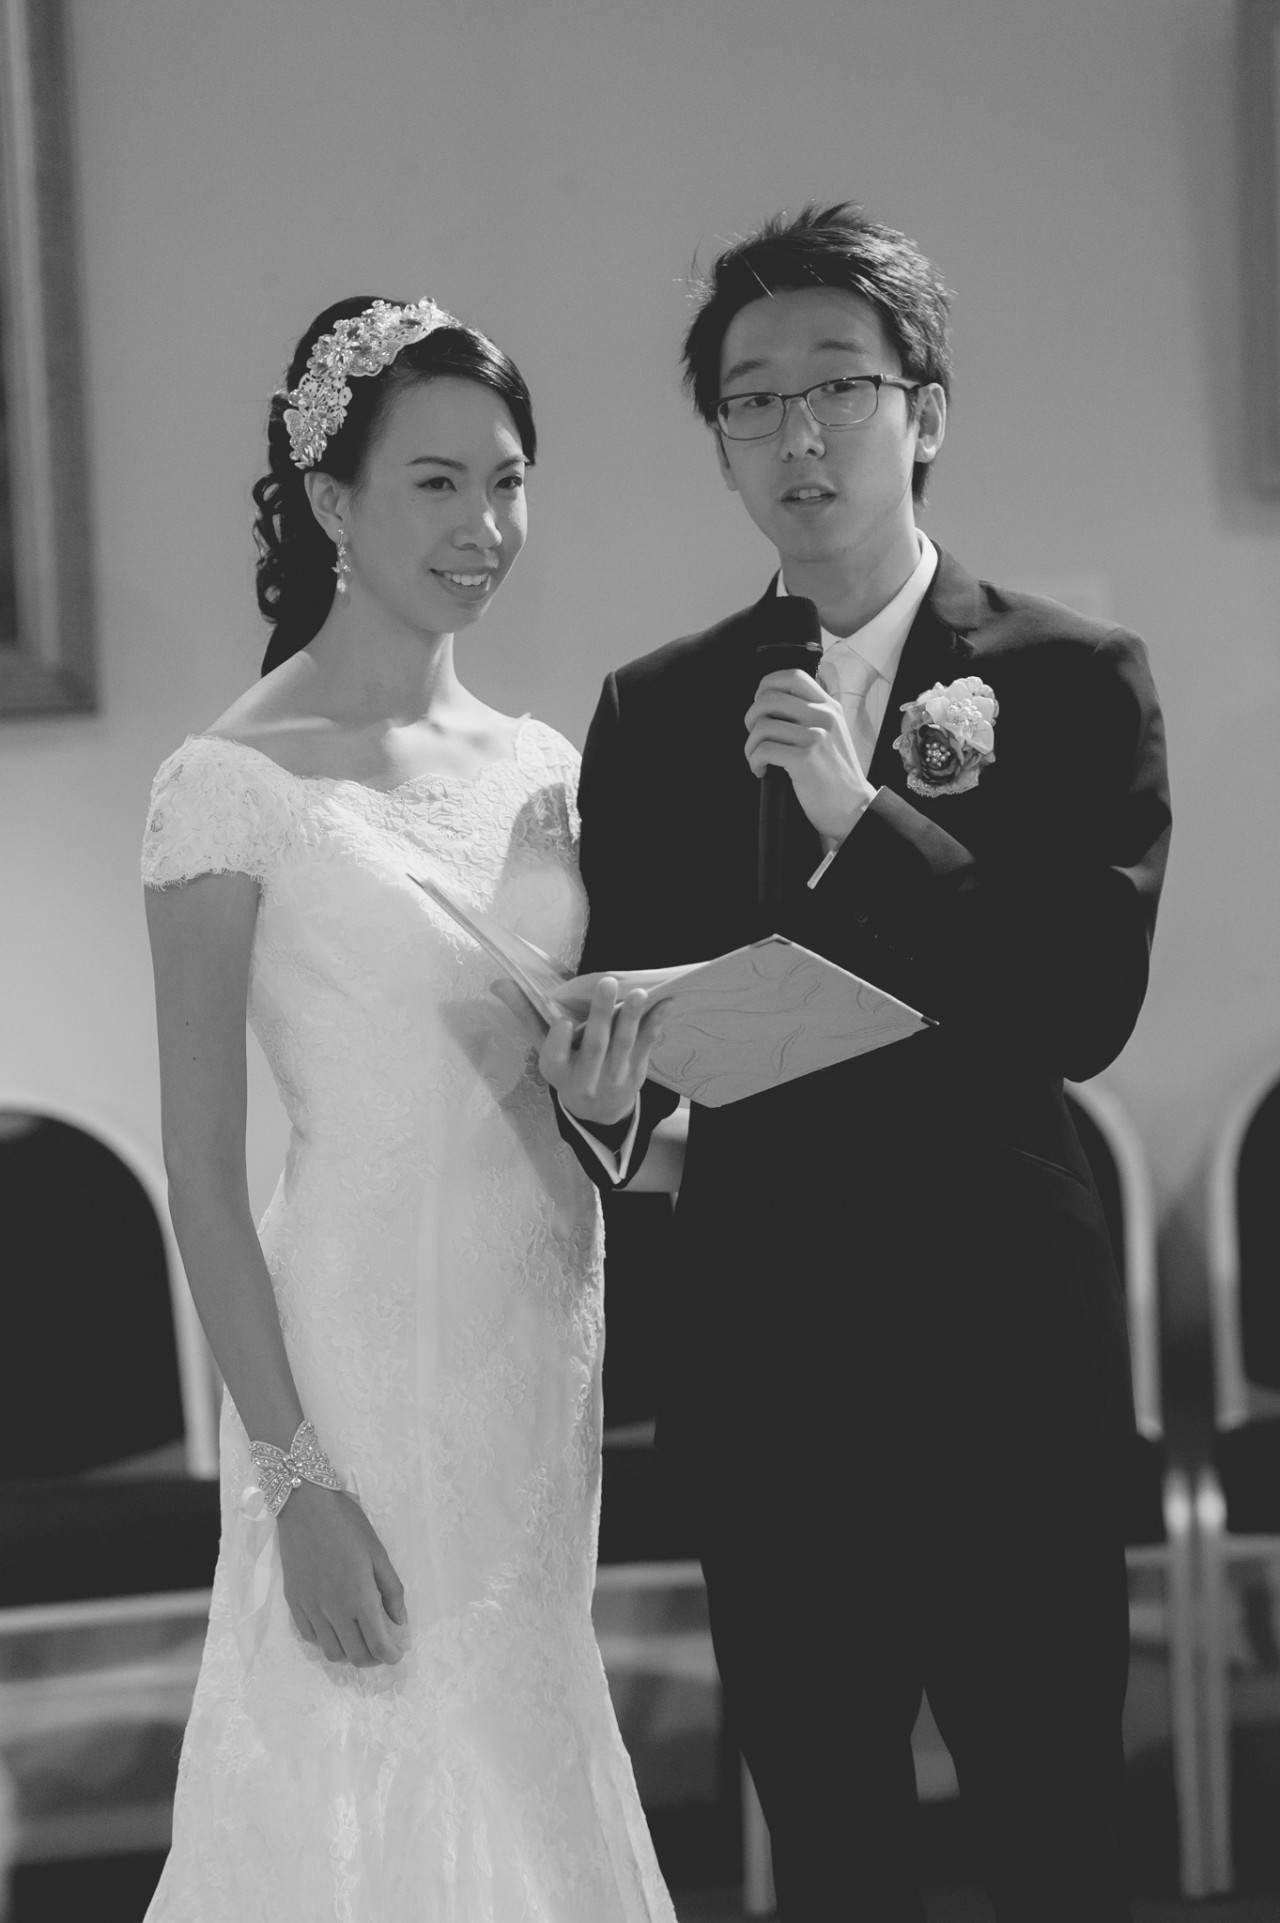 Jun reading his vows on his wedding day